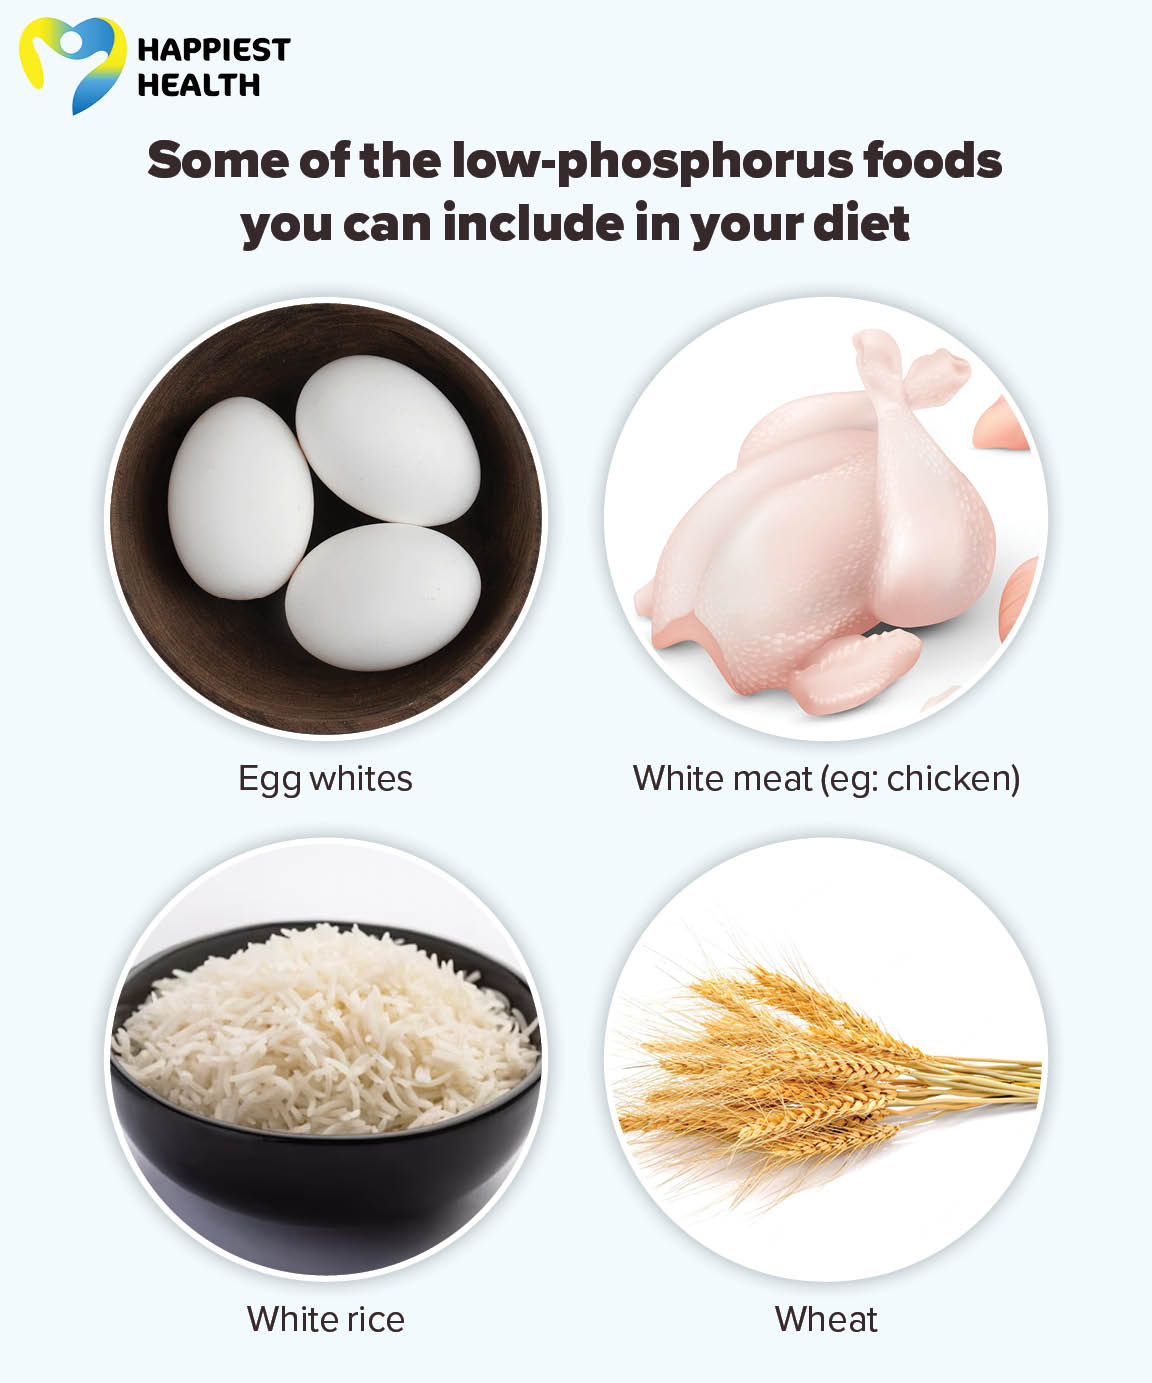 People with CKD are often advised to cut down on foods with phosphorus